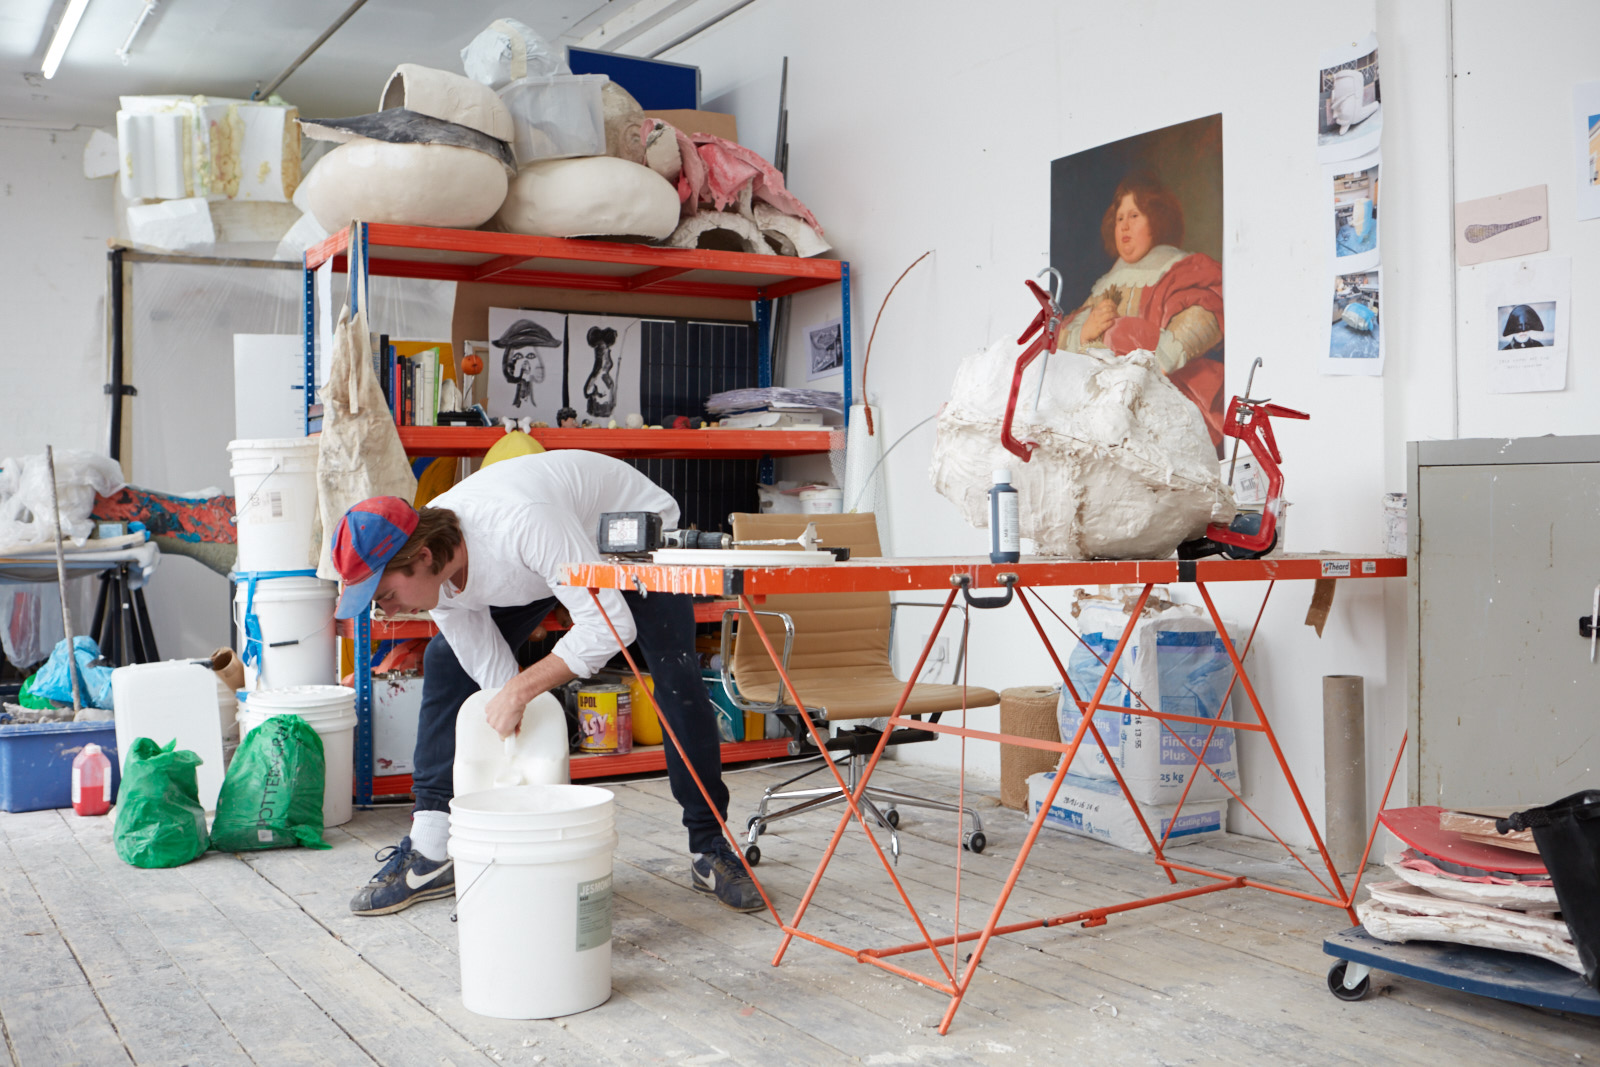 Hamish Pearch in his studio